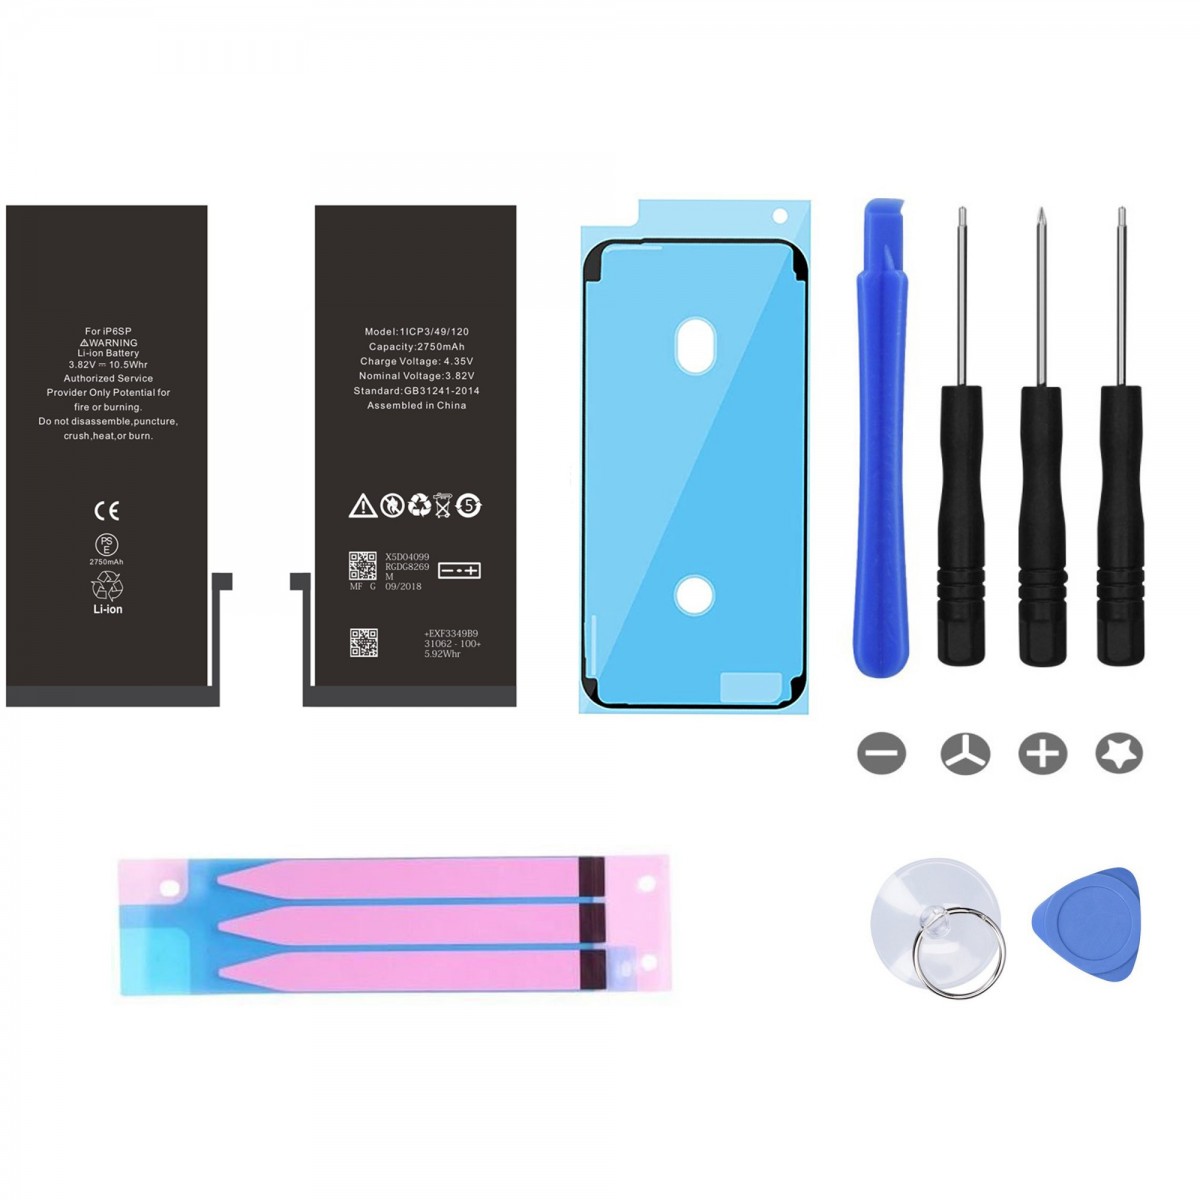 Kit Batterie iPhone 12 : Batterie + Outils + Stickers + Joint